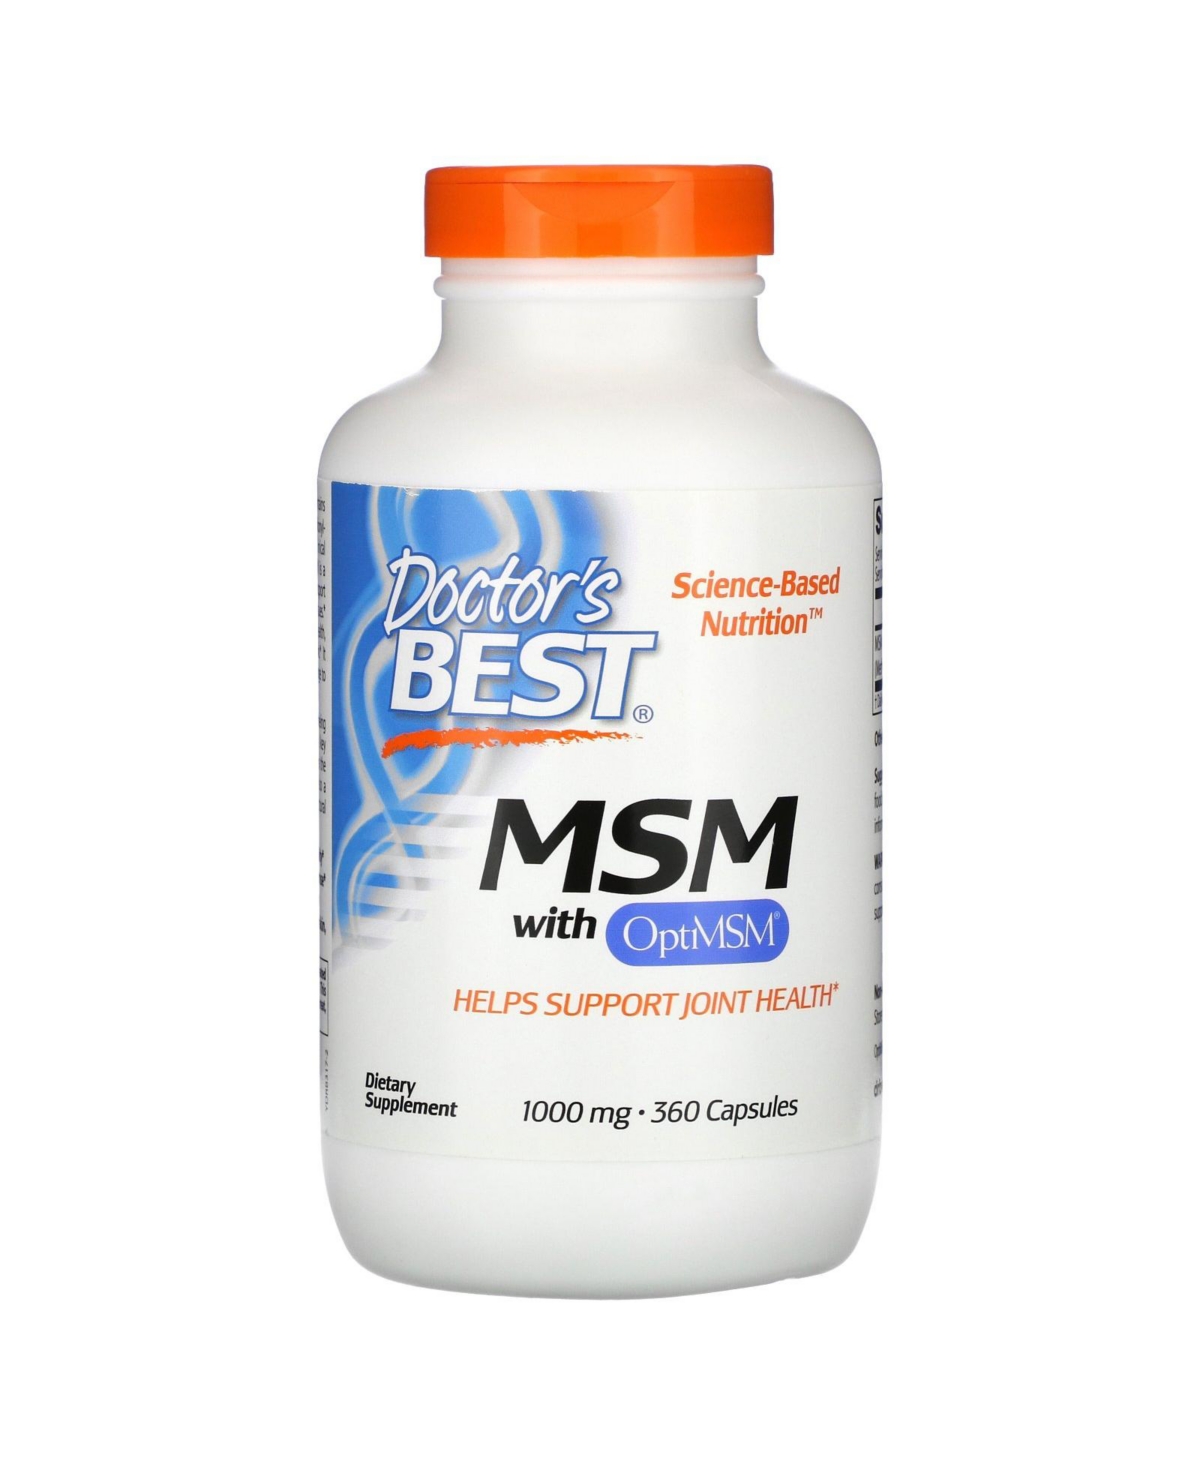 Msm with OptiMSM 1 000 mg - 360 Capsules - Assorted Pre-Pack